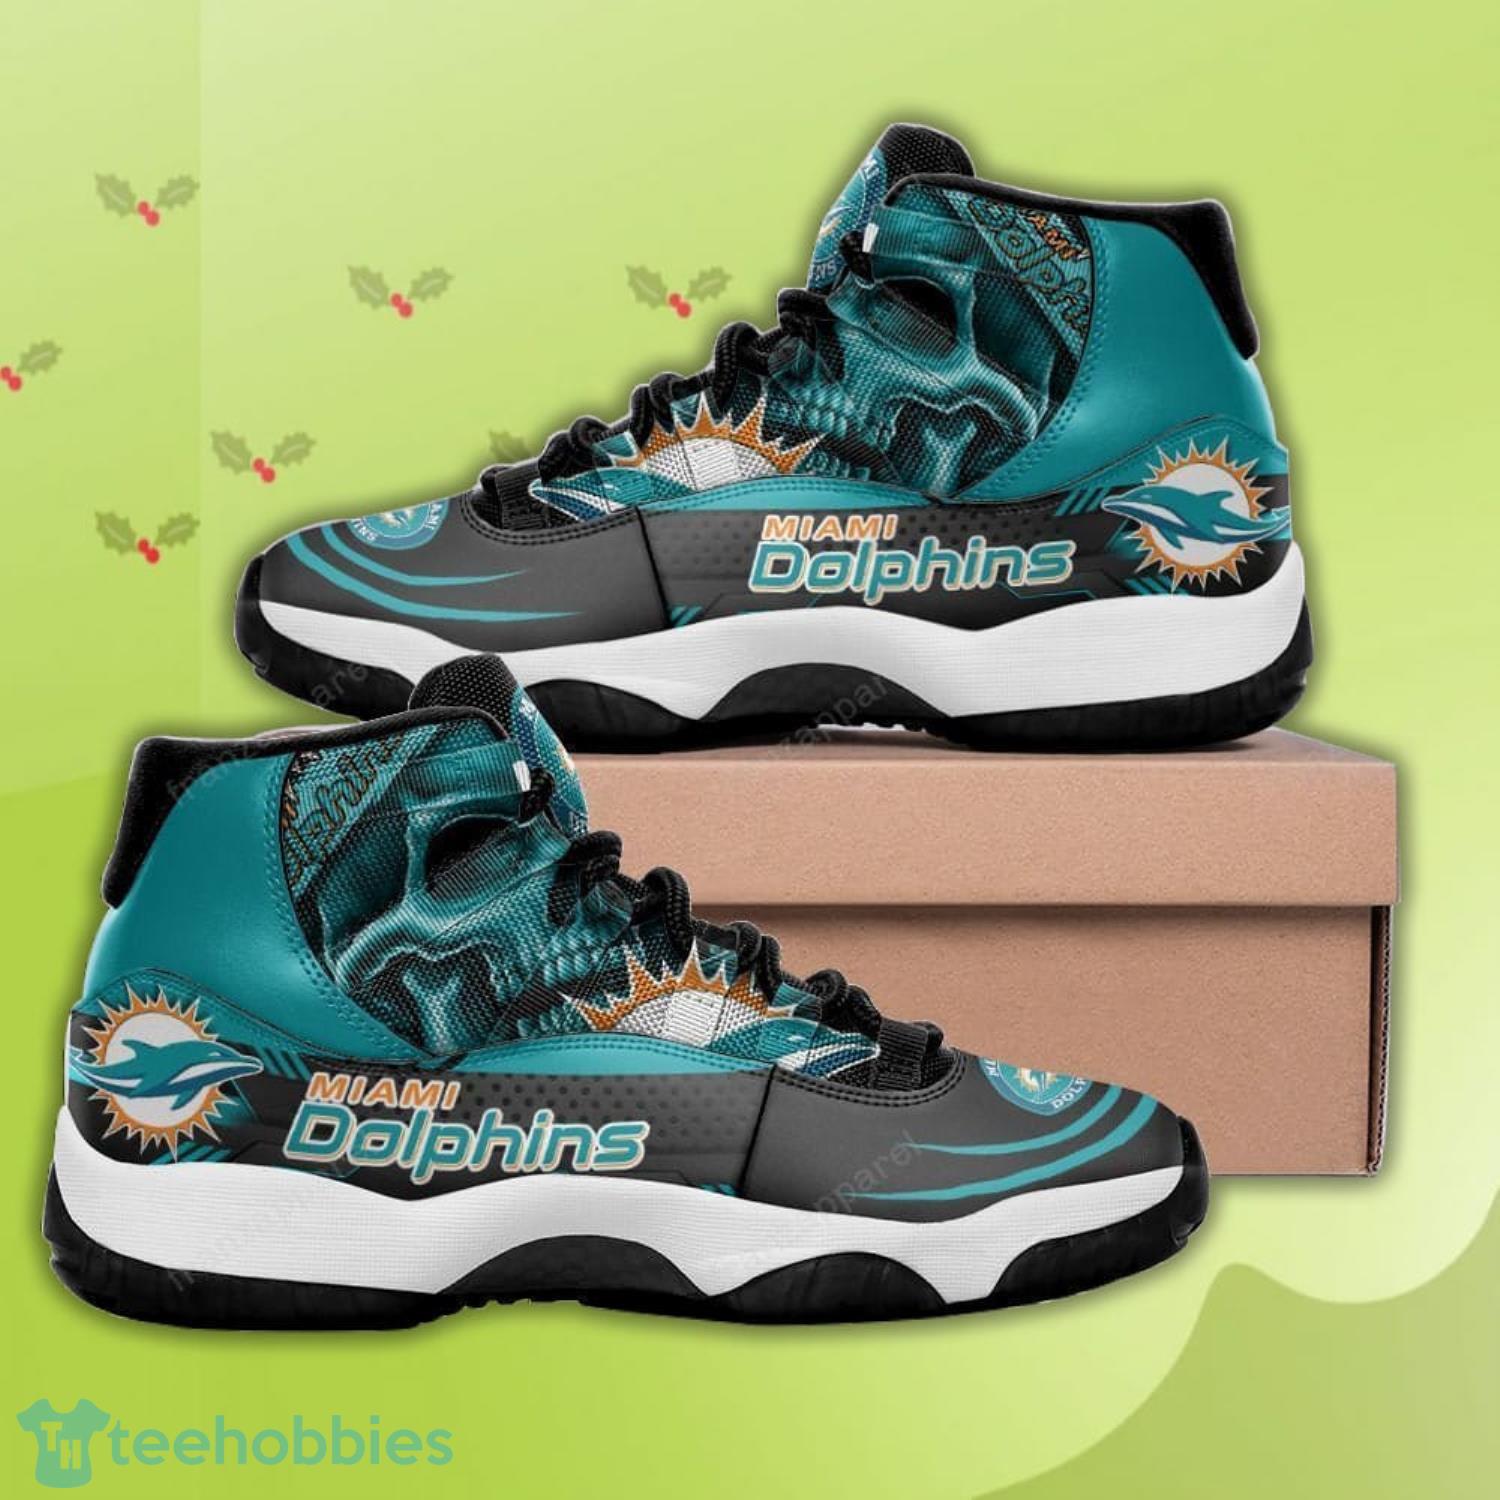 Miami Dolphins Team Skull Air Jordan 11 Shoes For Fans Product Photo 1